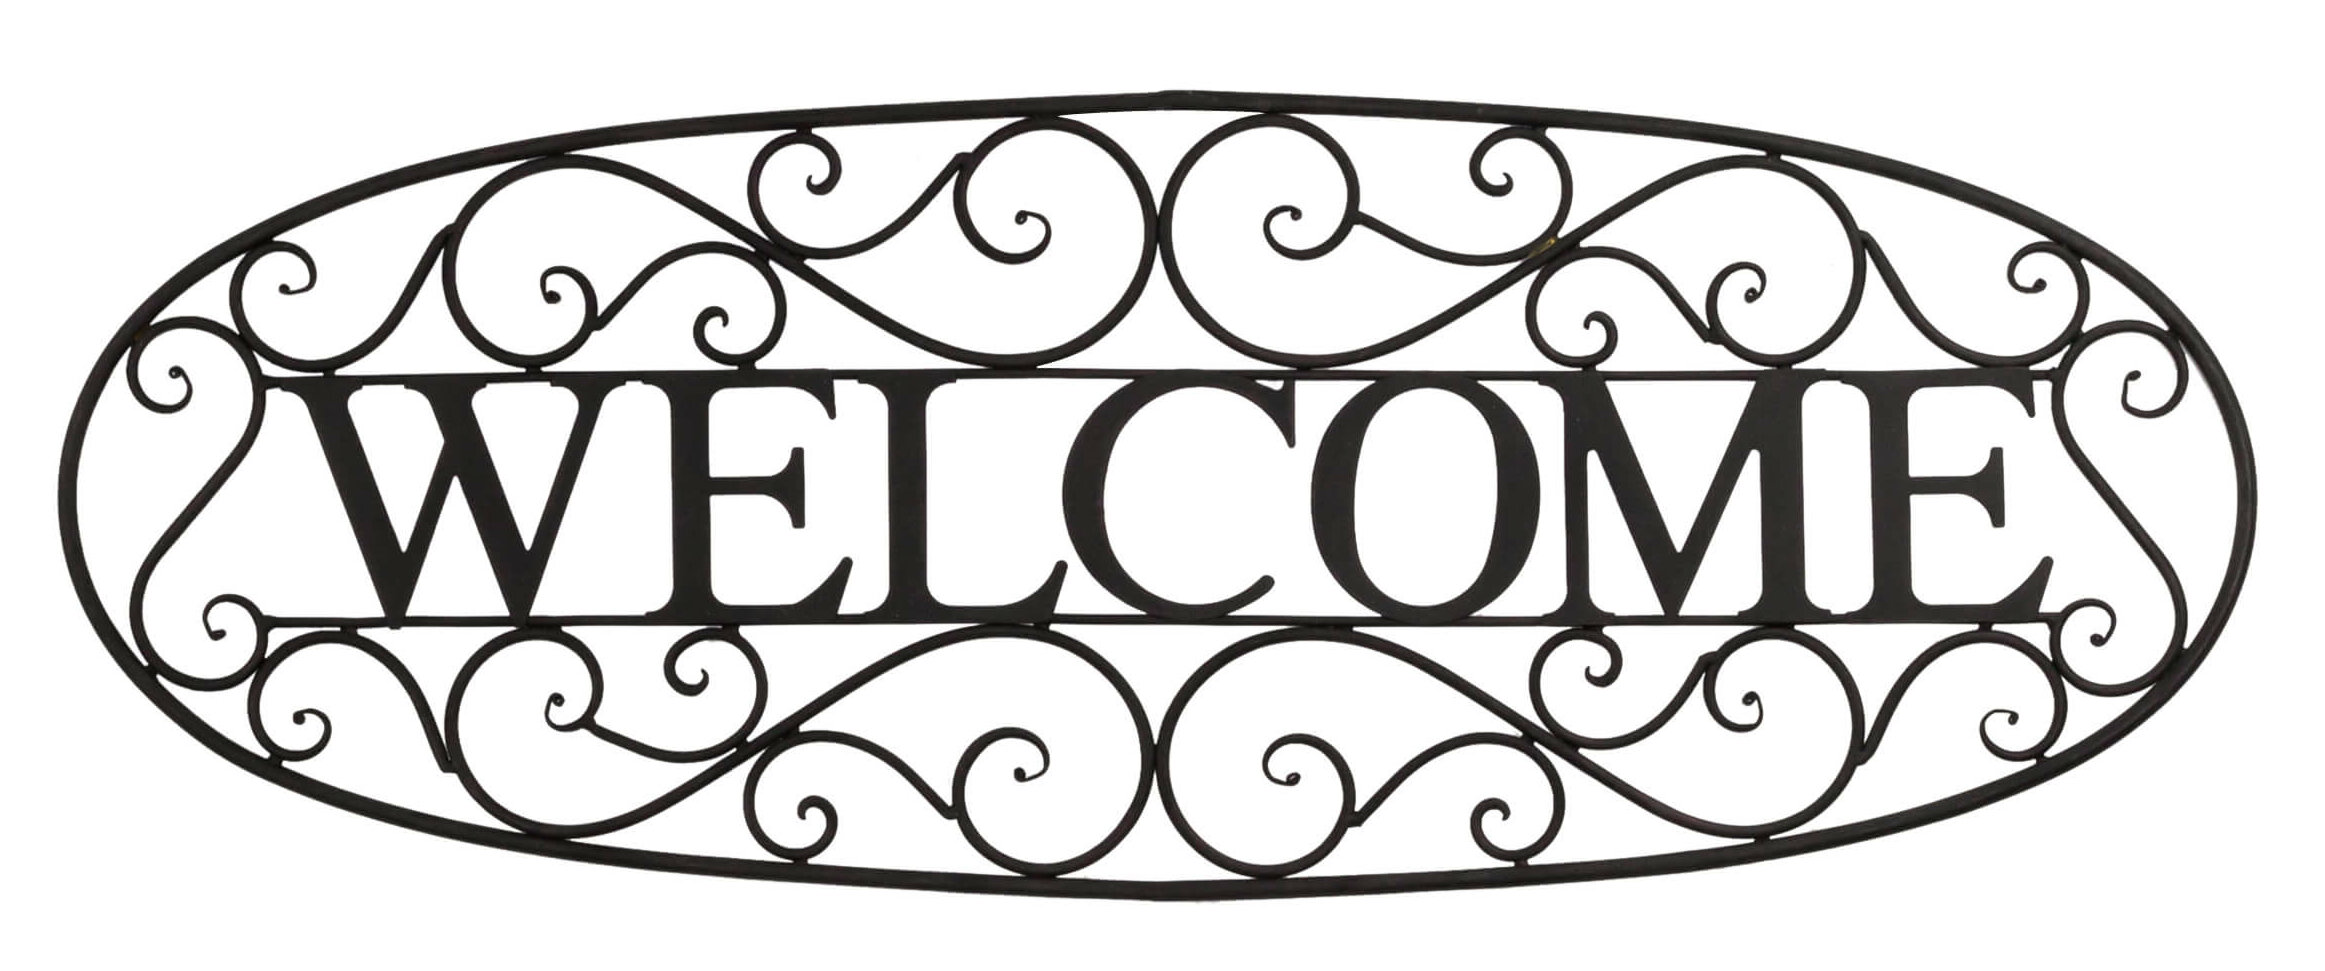 Image result for welcome sign